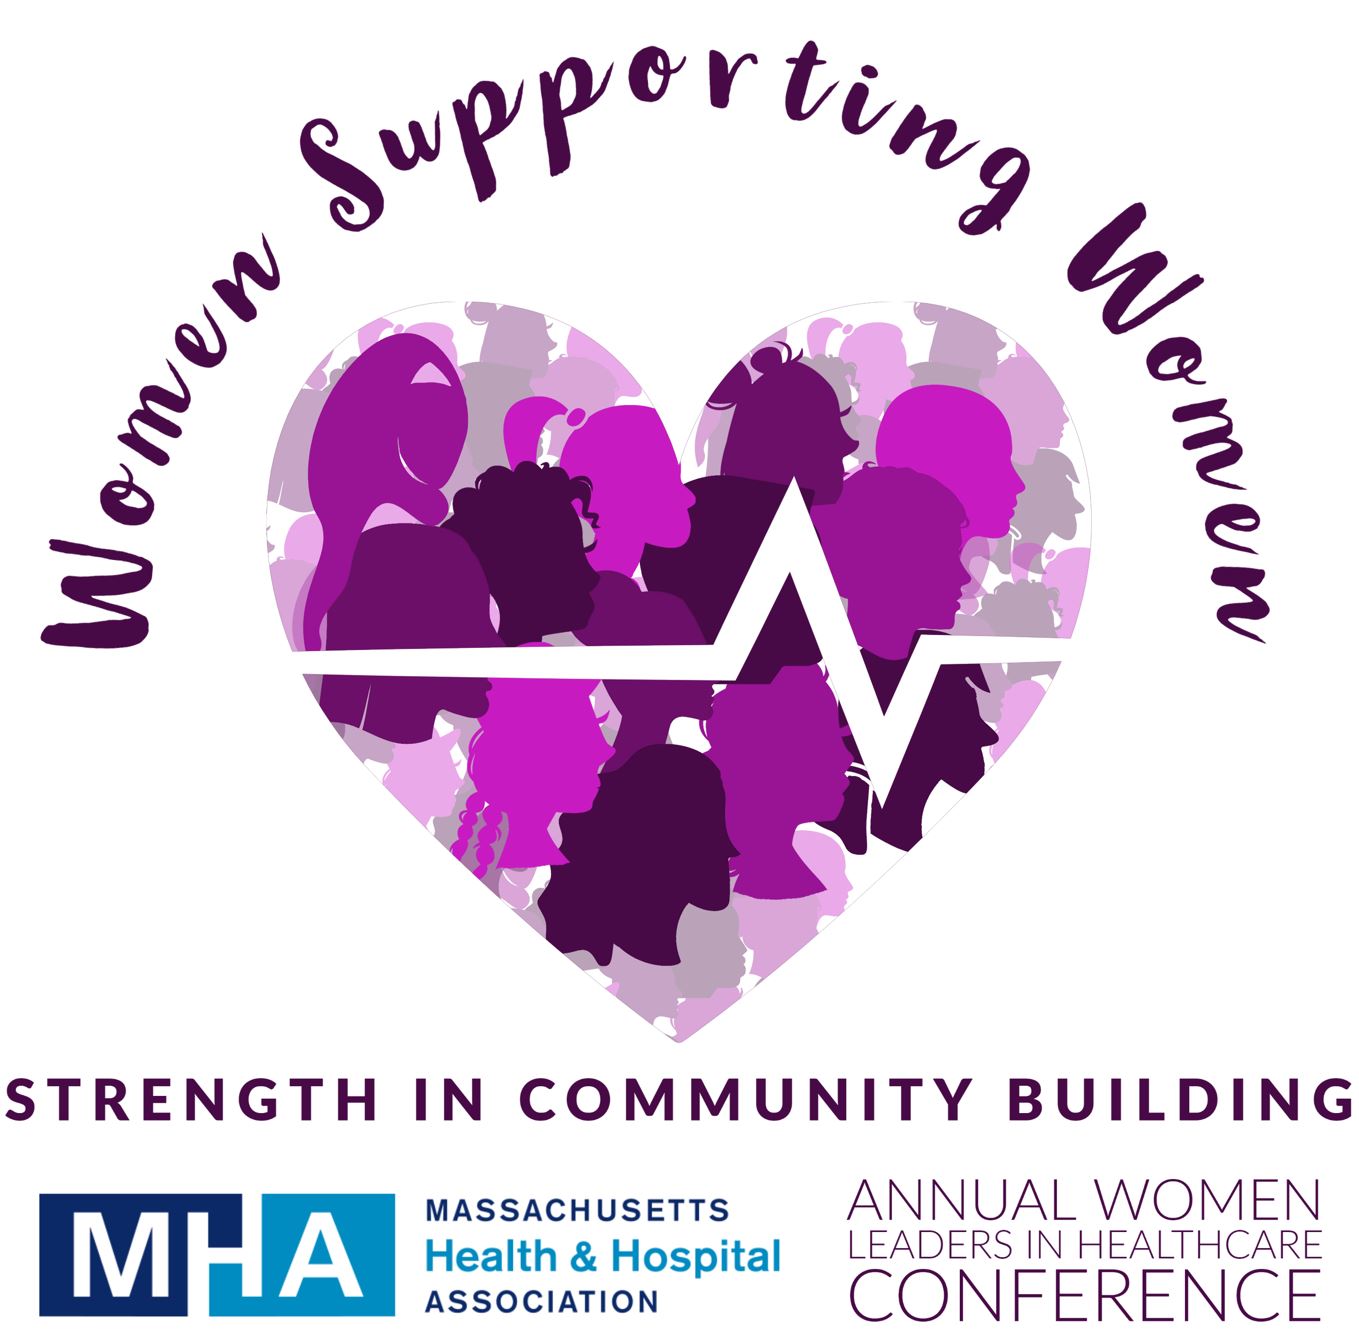 Annual Women Leaders in Healthcare Conference